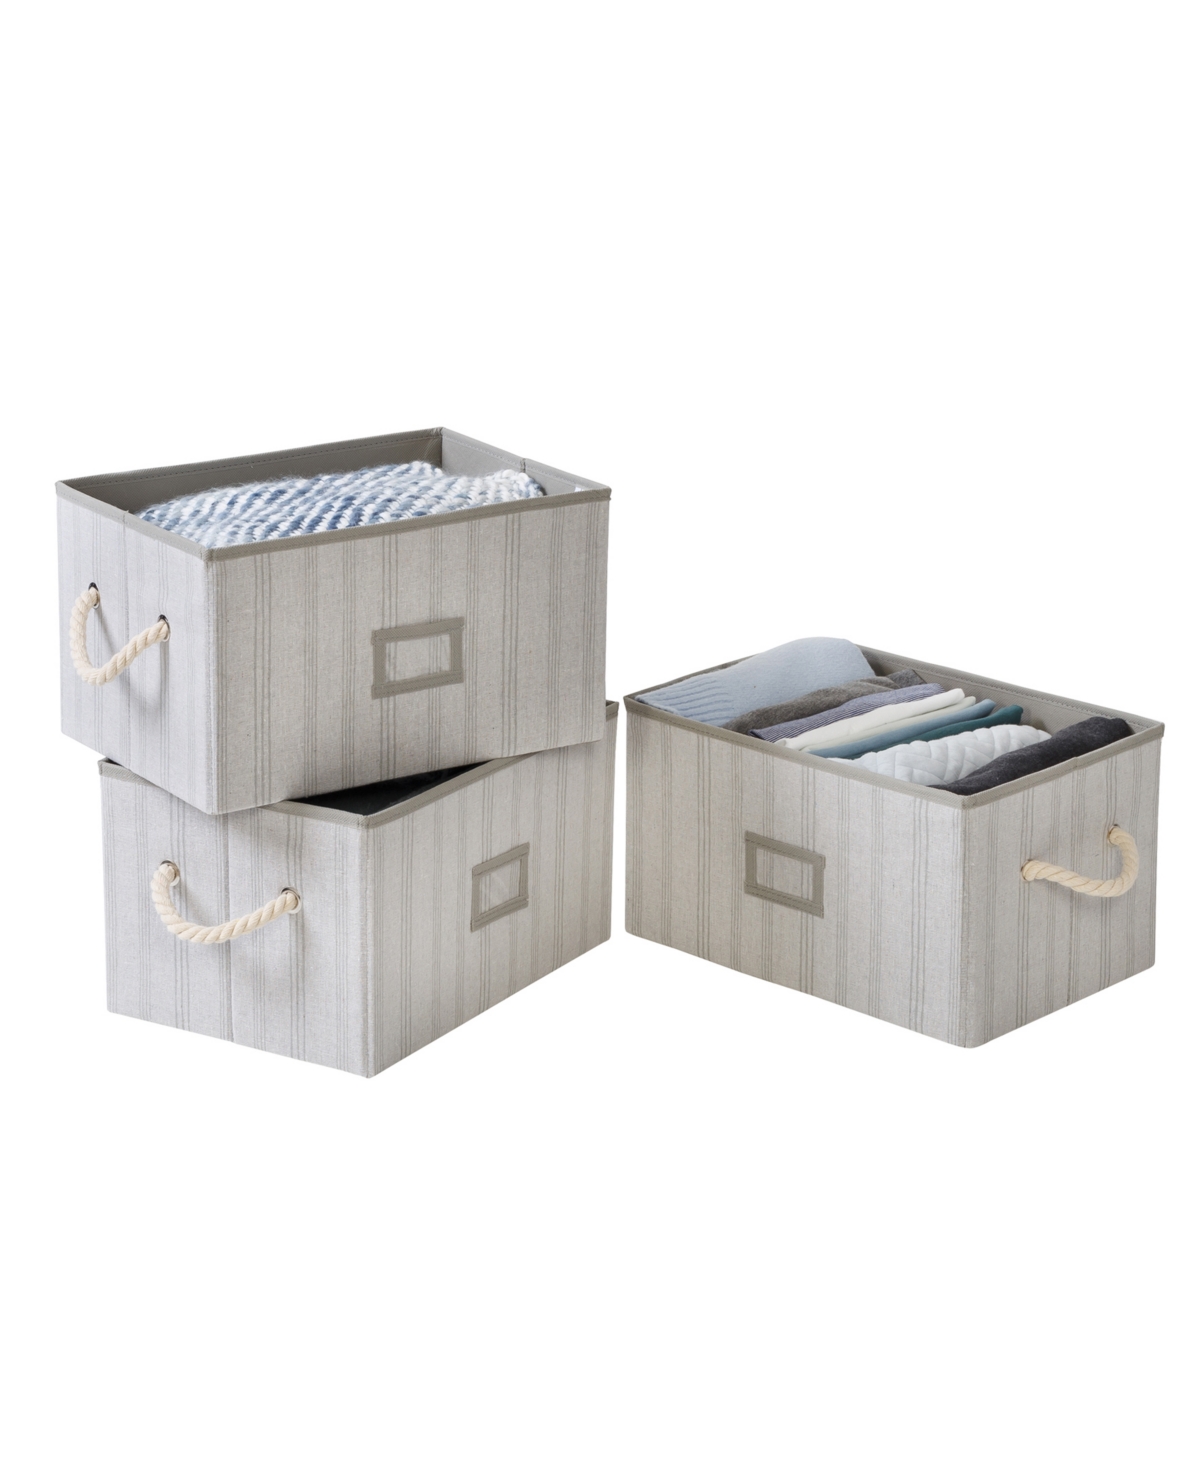 Shop Honey Can Do Set Of 3 Collapsible Large Fabric Storage Bins With Handles, Stripes In Multi